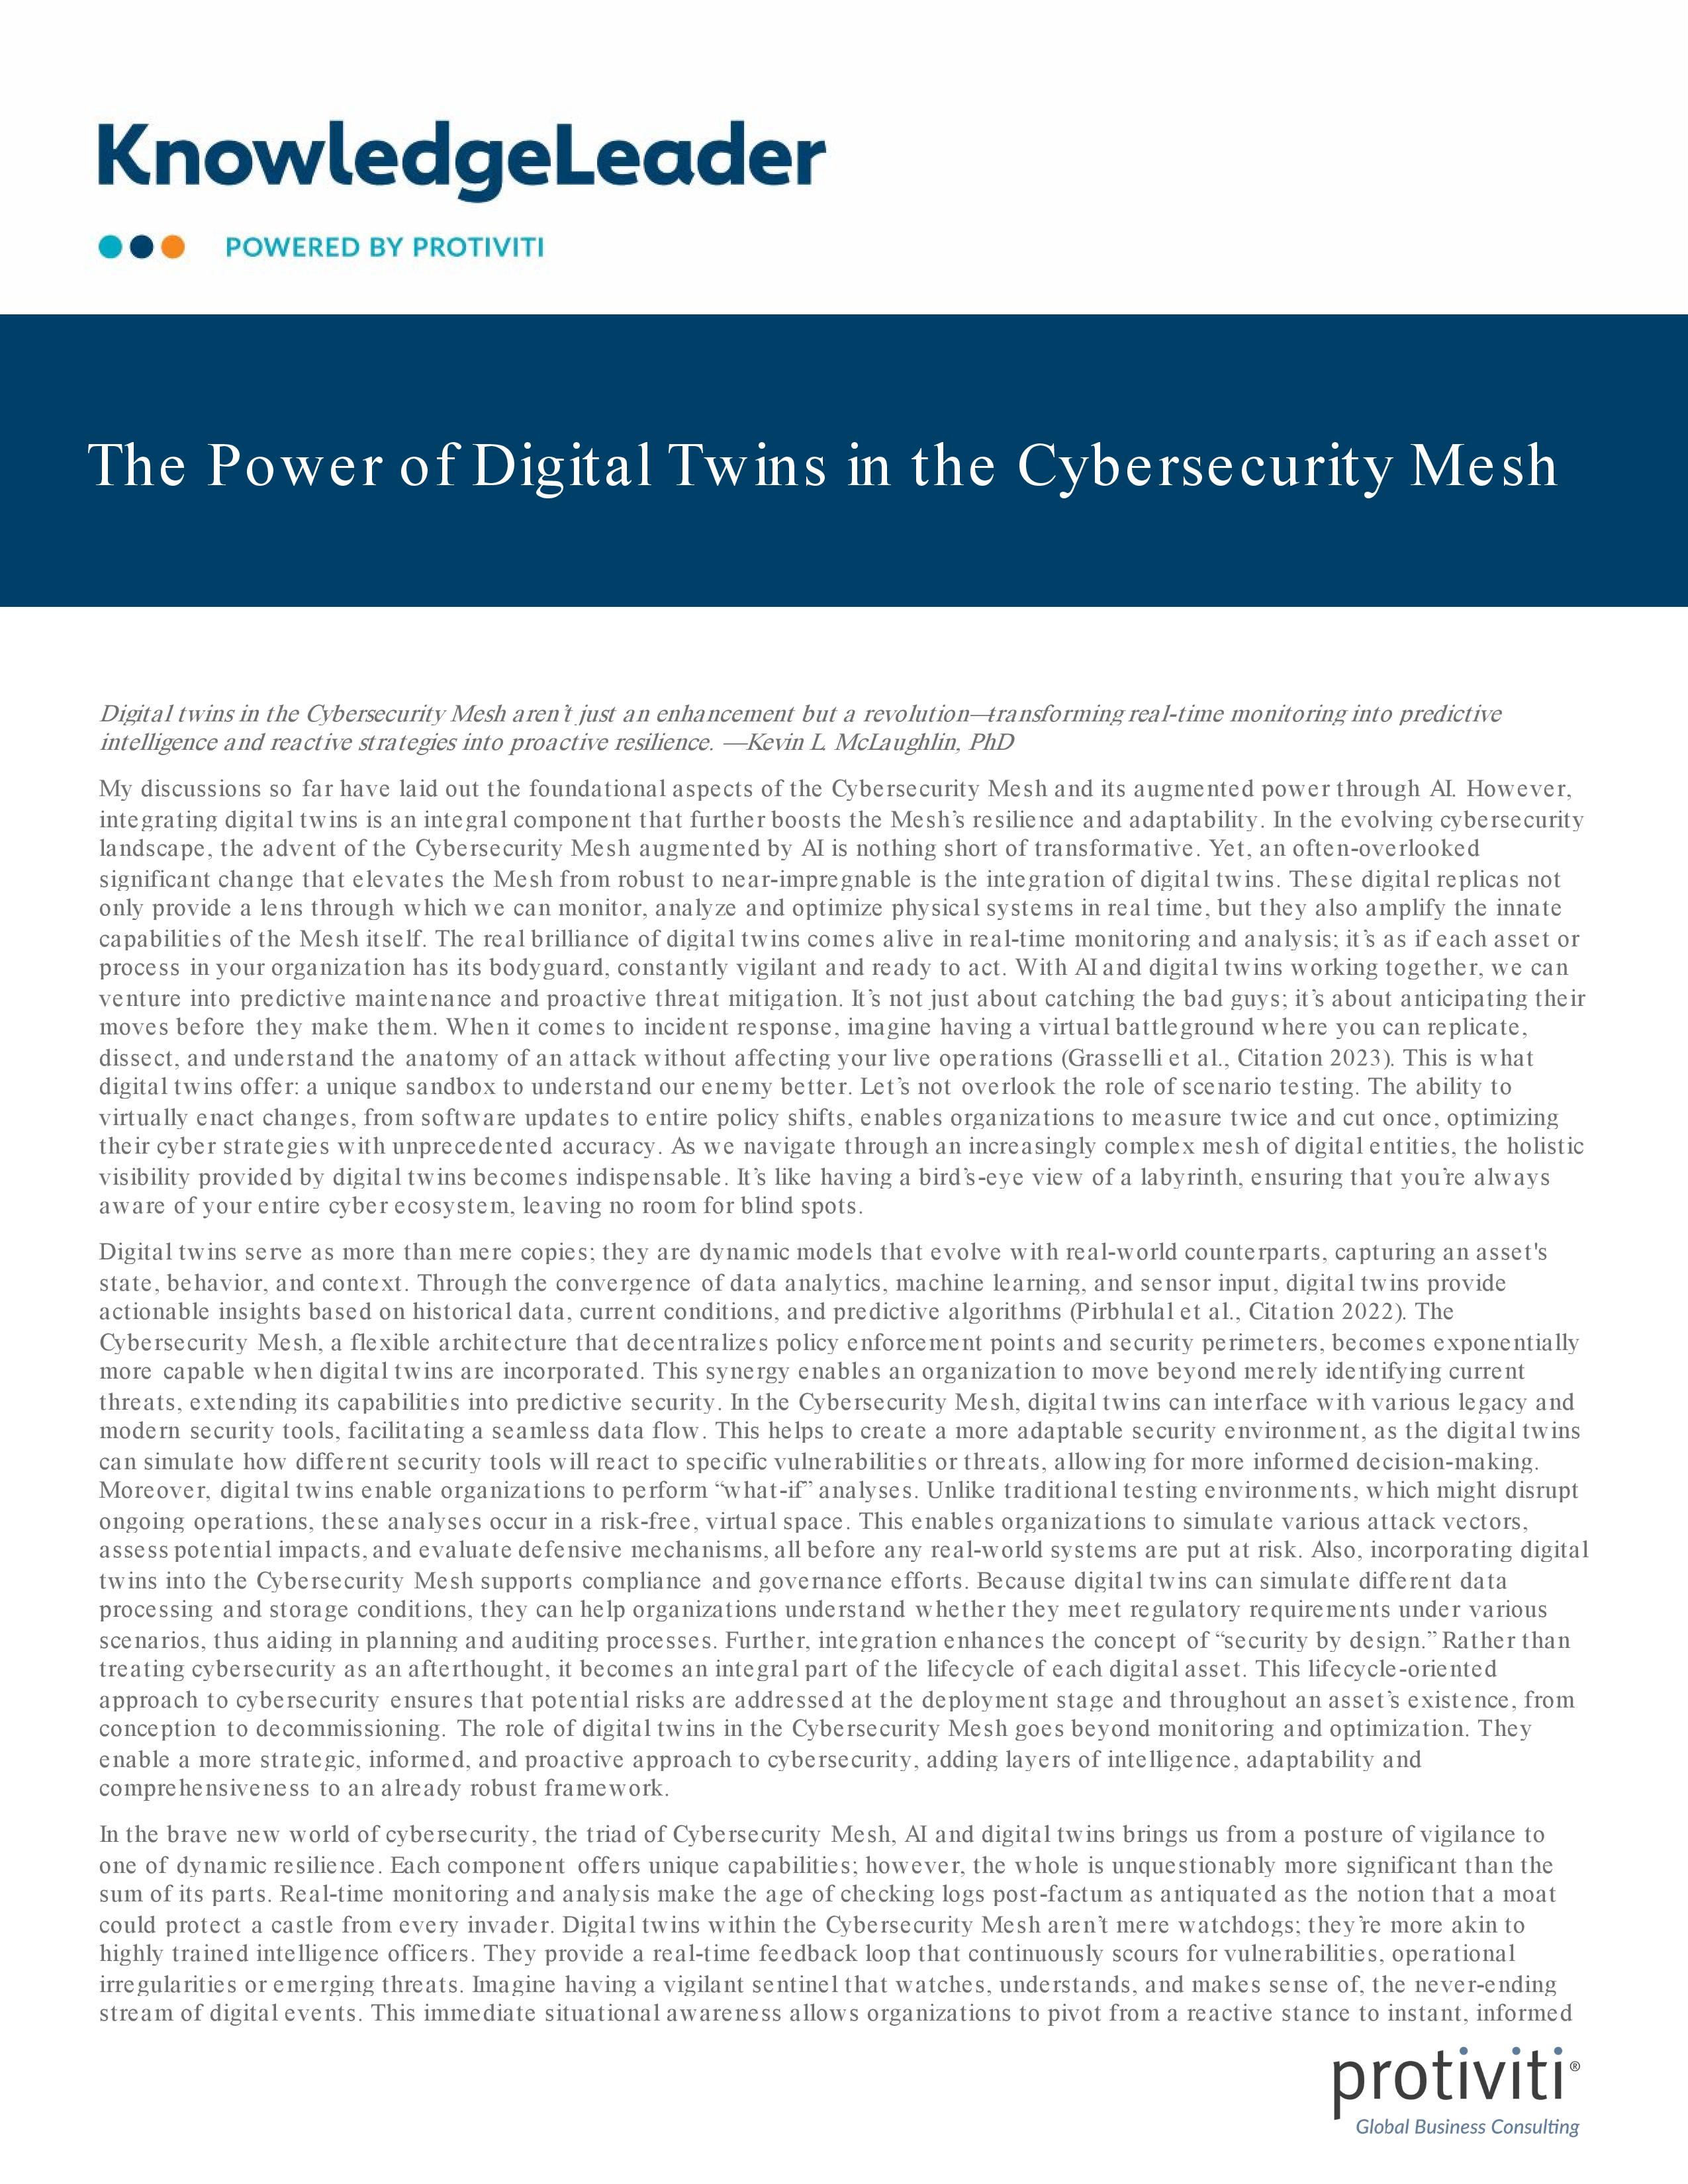 screenshot of the first page of The Power of Digital Twins in the Cybersecurity Mesh